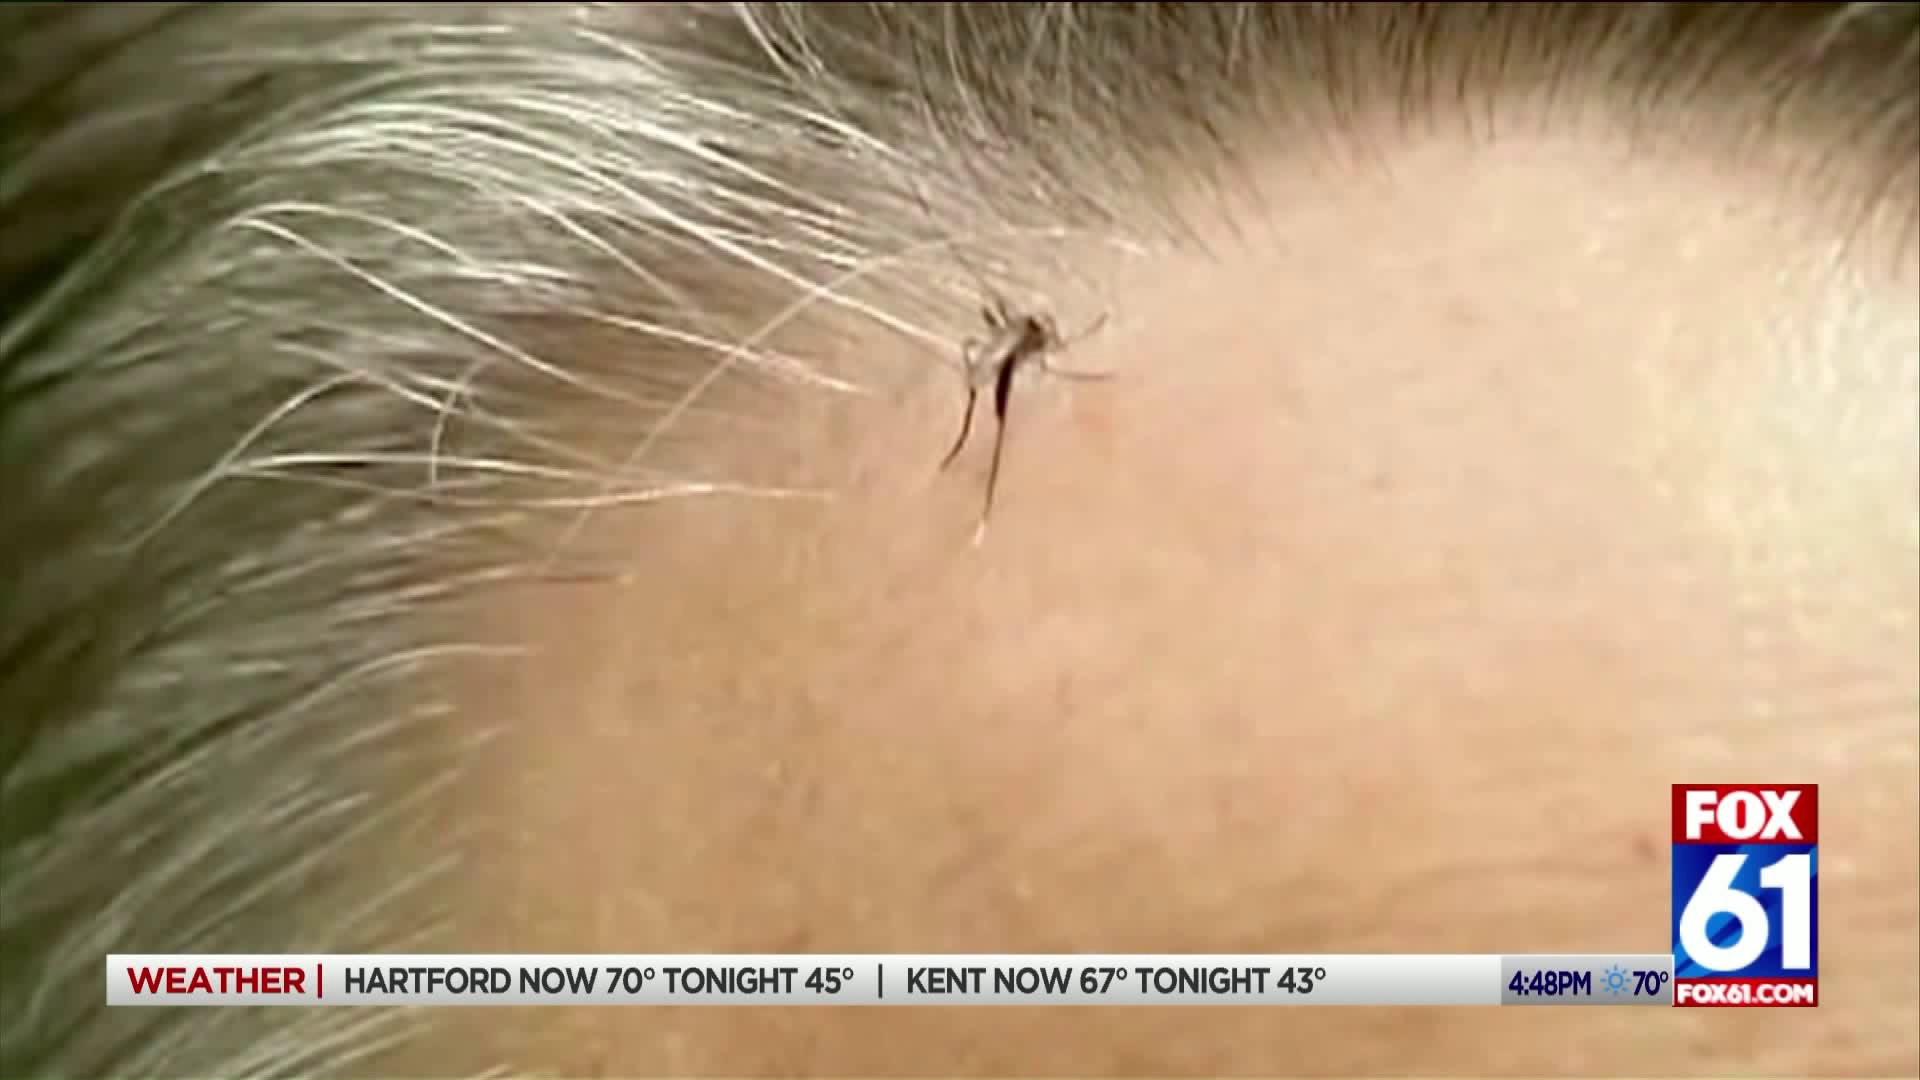 Mosquito testing begins in CT